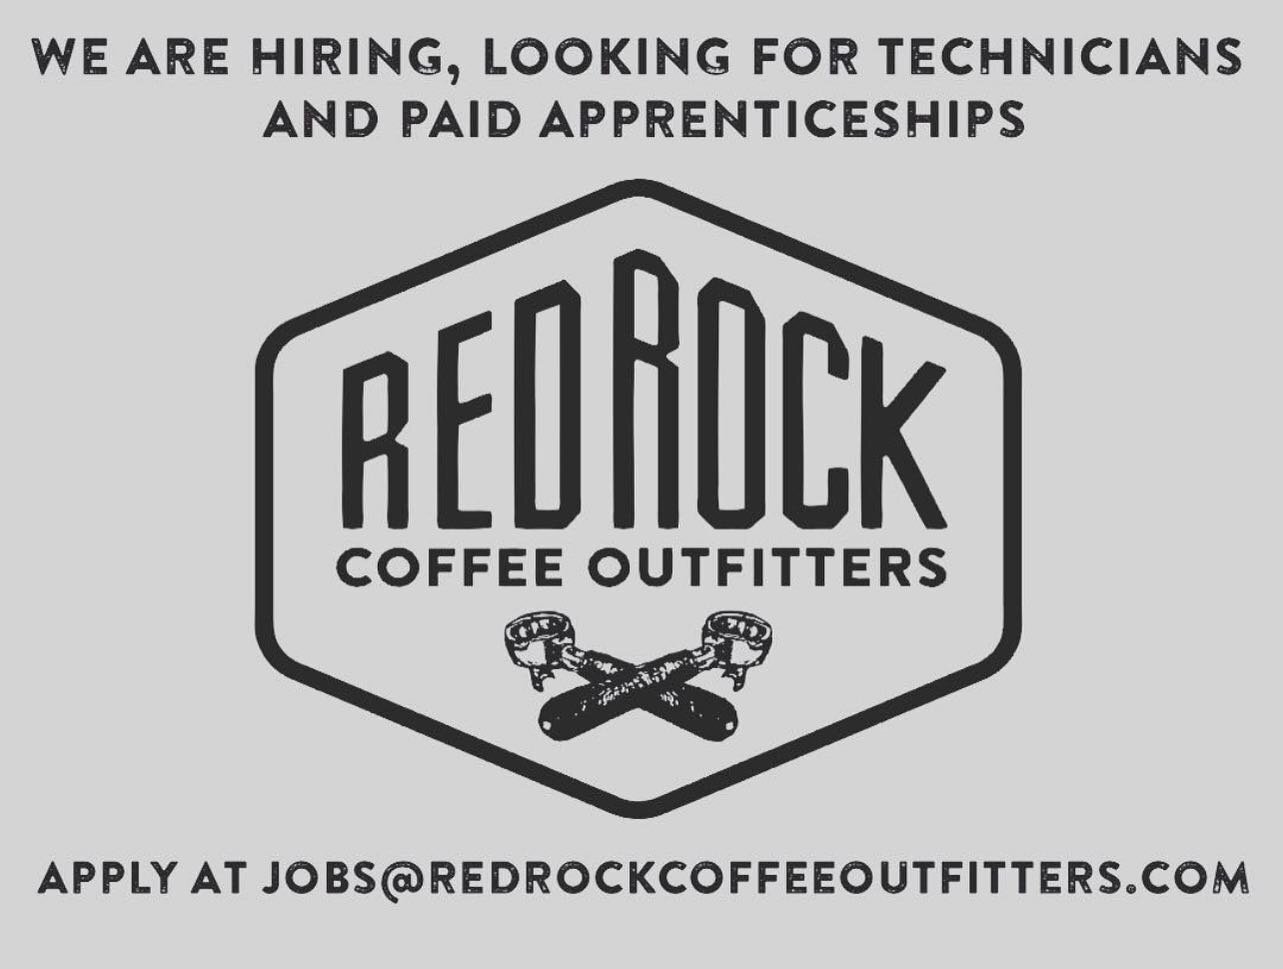 We are looking to fill two tech positions as soon as possible.  No experience required. Just a love for coffee, people and some technical abilities are a plus.